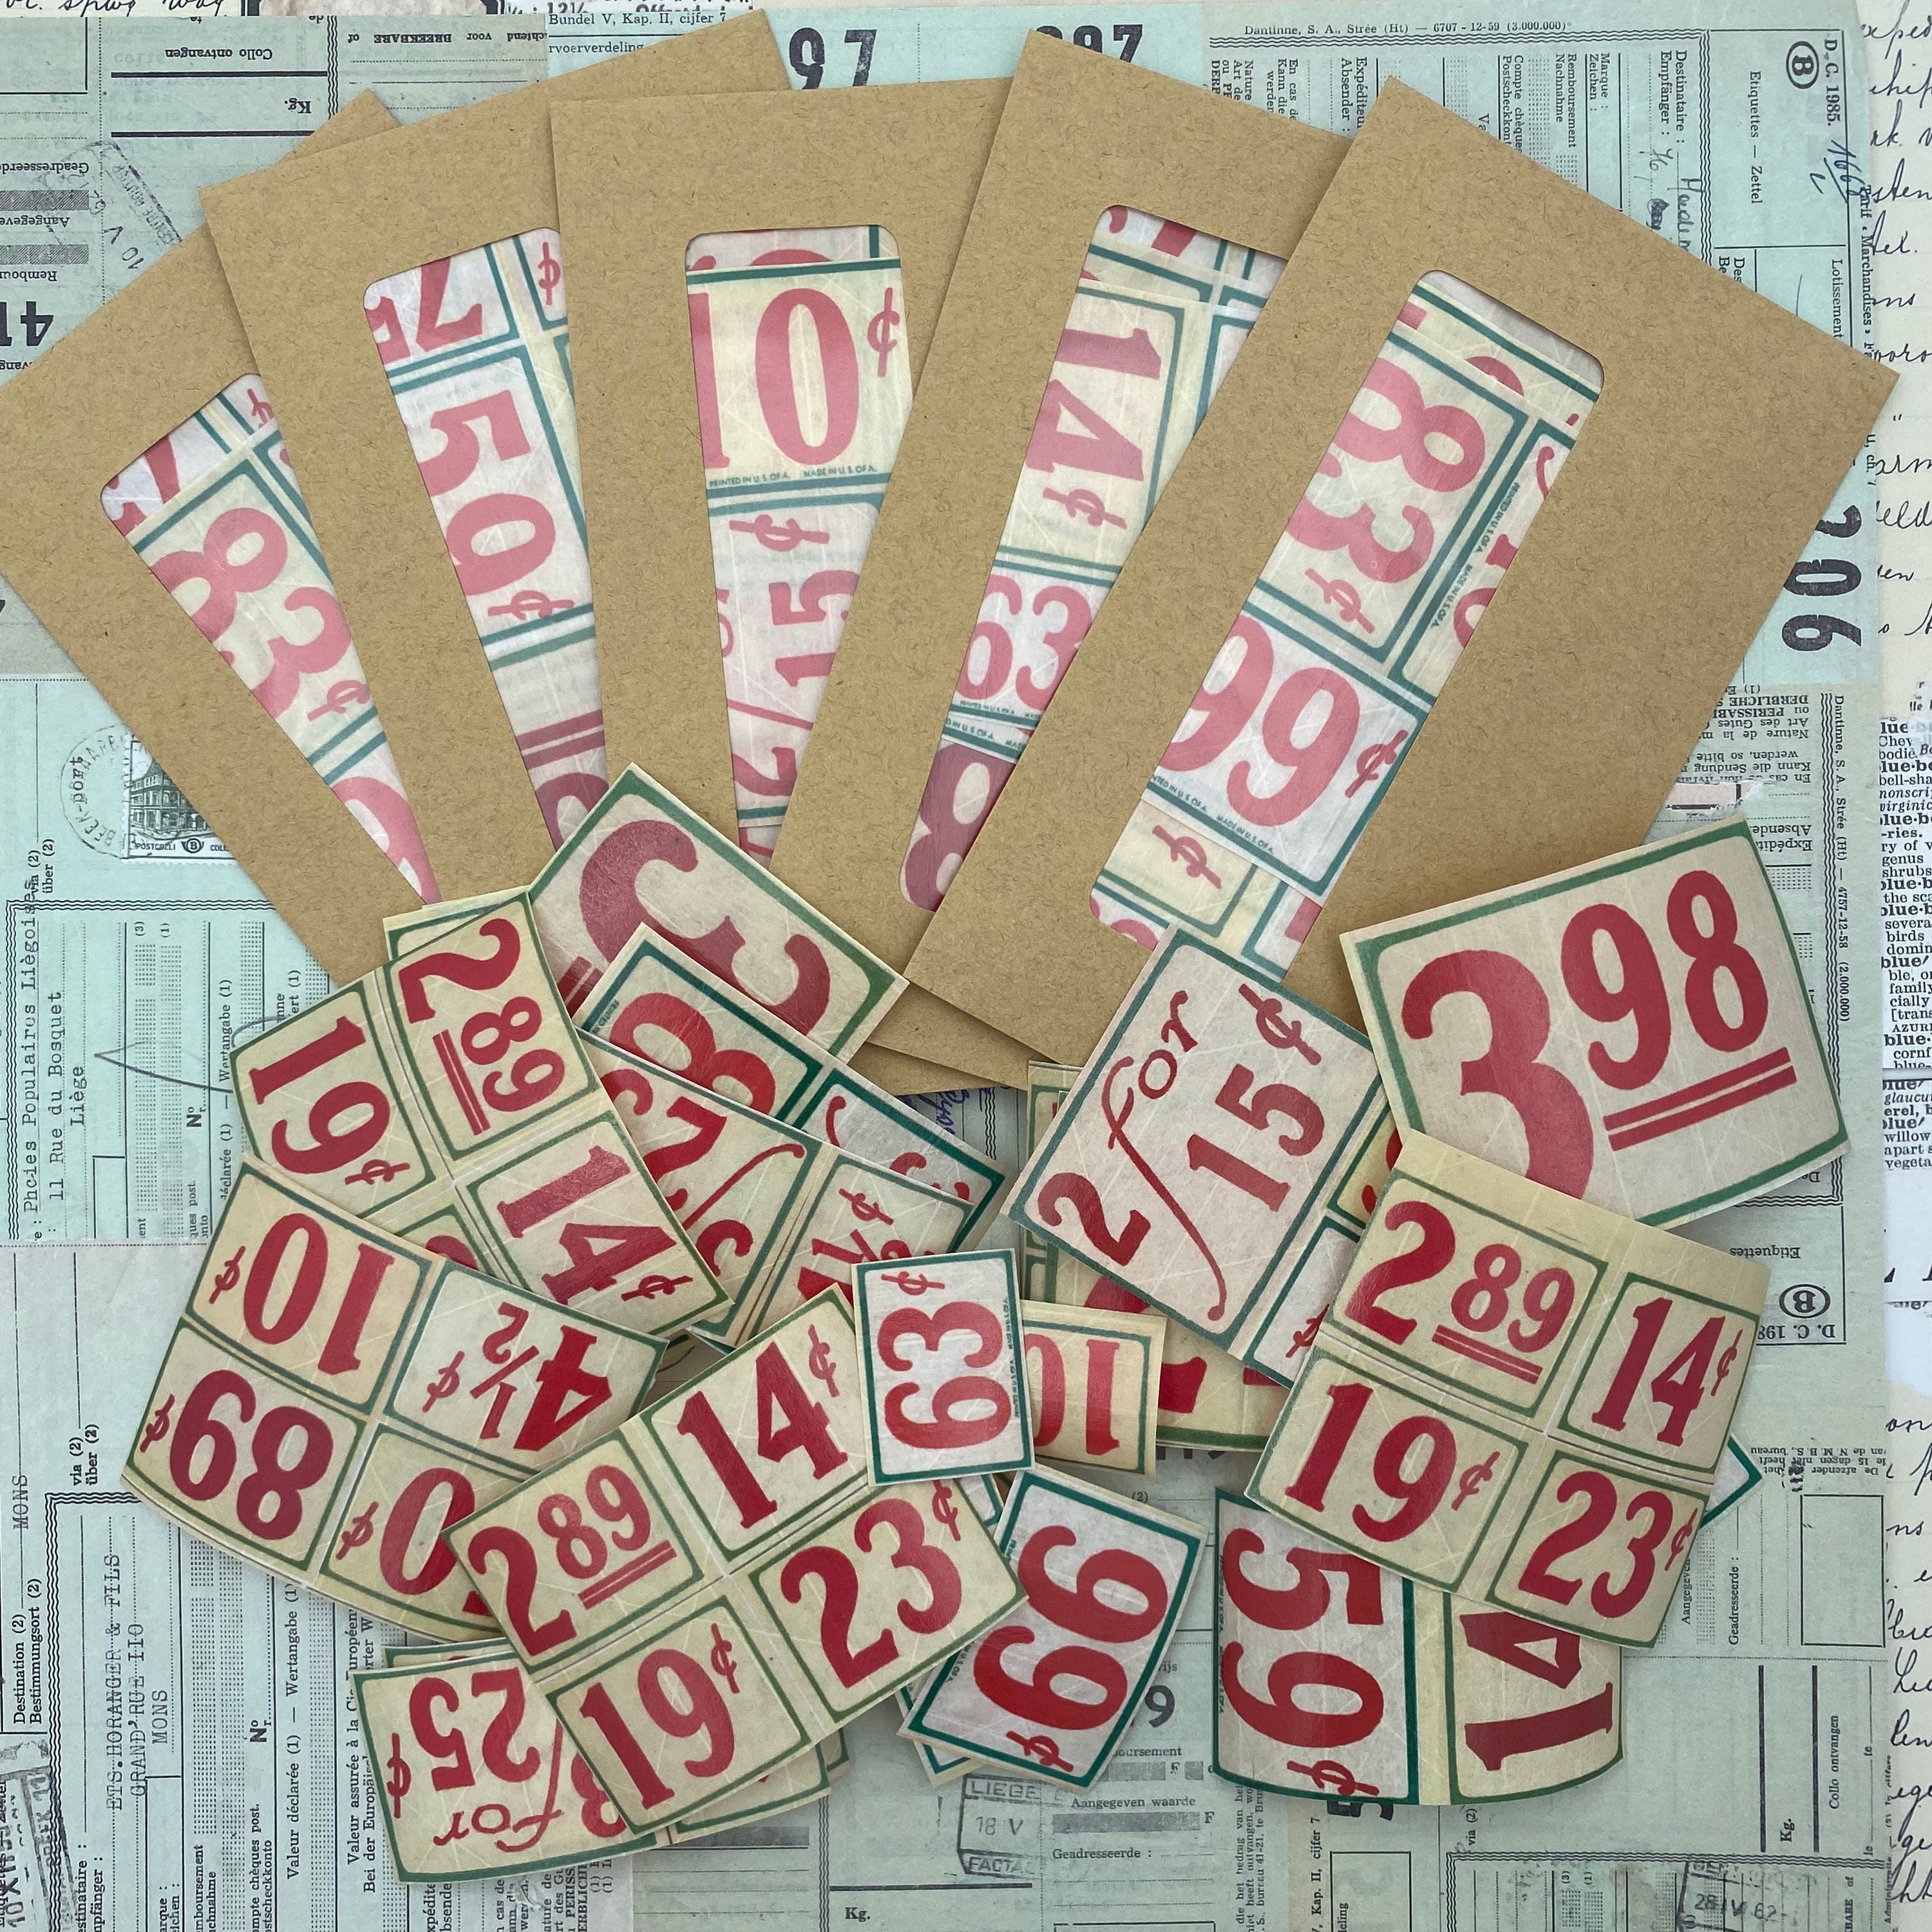 Color Street Pricing Stickers 1 Inch 120 Pcs Includes 14 Dollar Stickers 